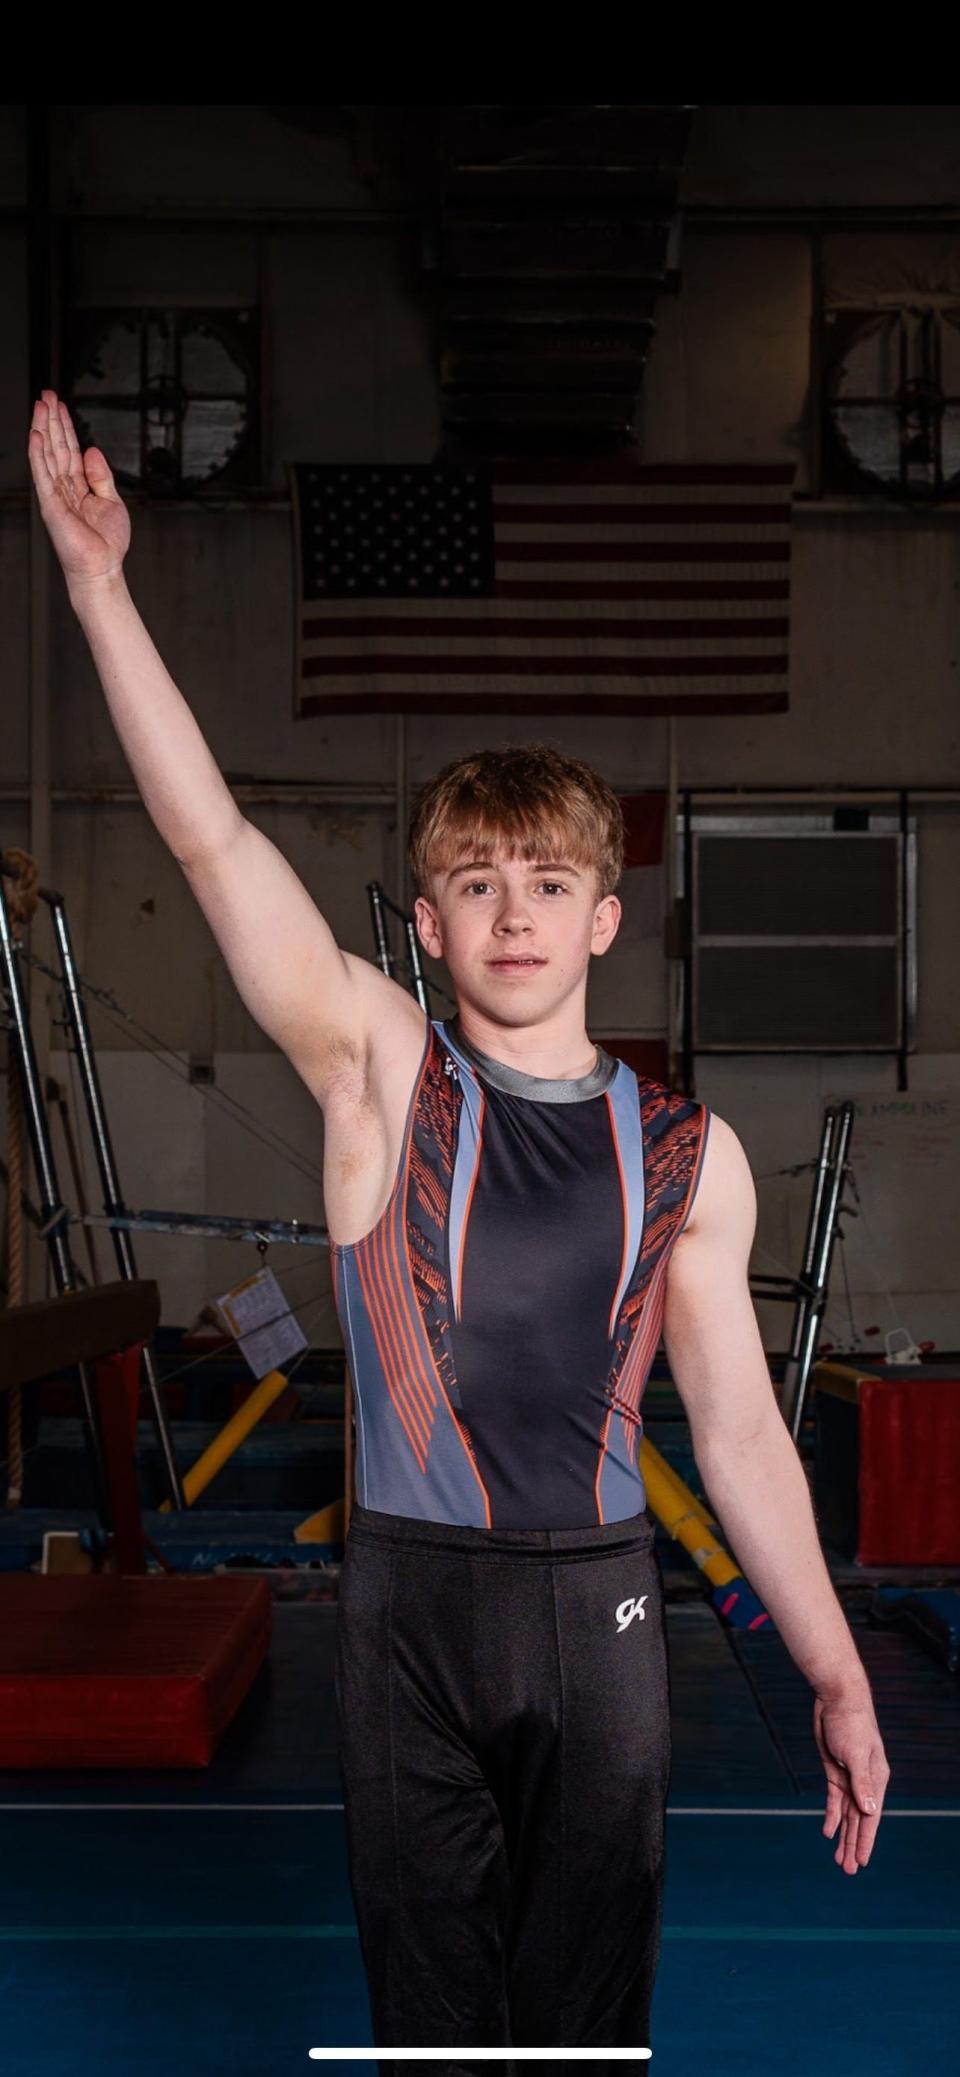 Countryside Boys Gymnastics Nicholas Caldwell is competing in the Eastern National Championships April 26-28